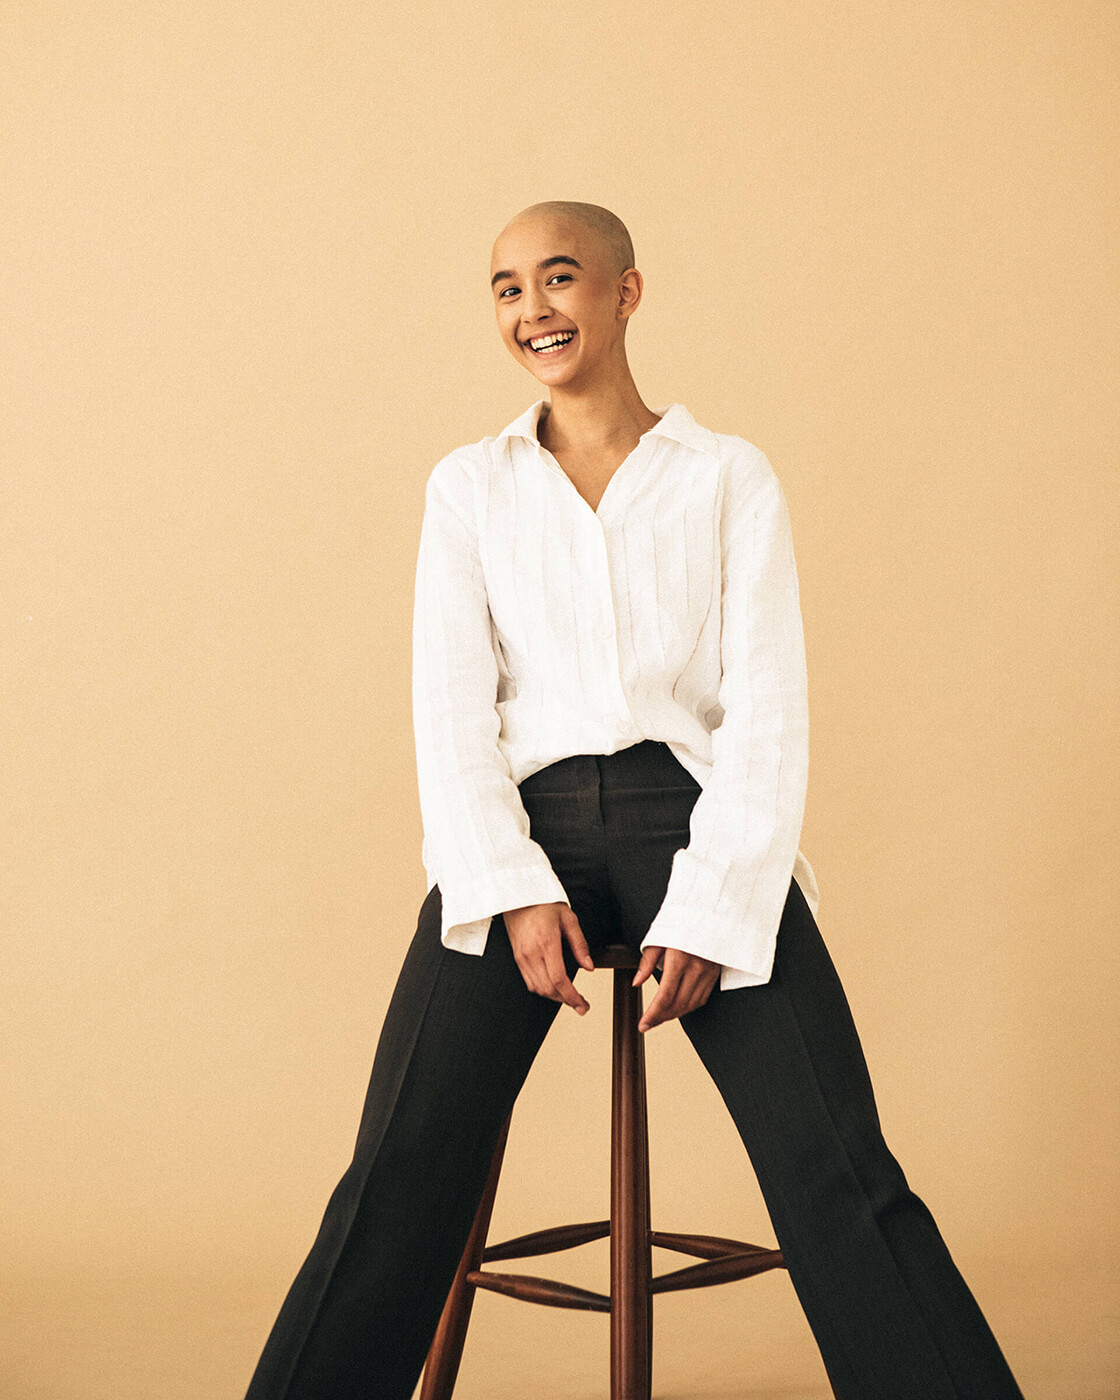 A laughing girl sitting on a chair wearing a white shirt and black trousers